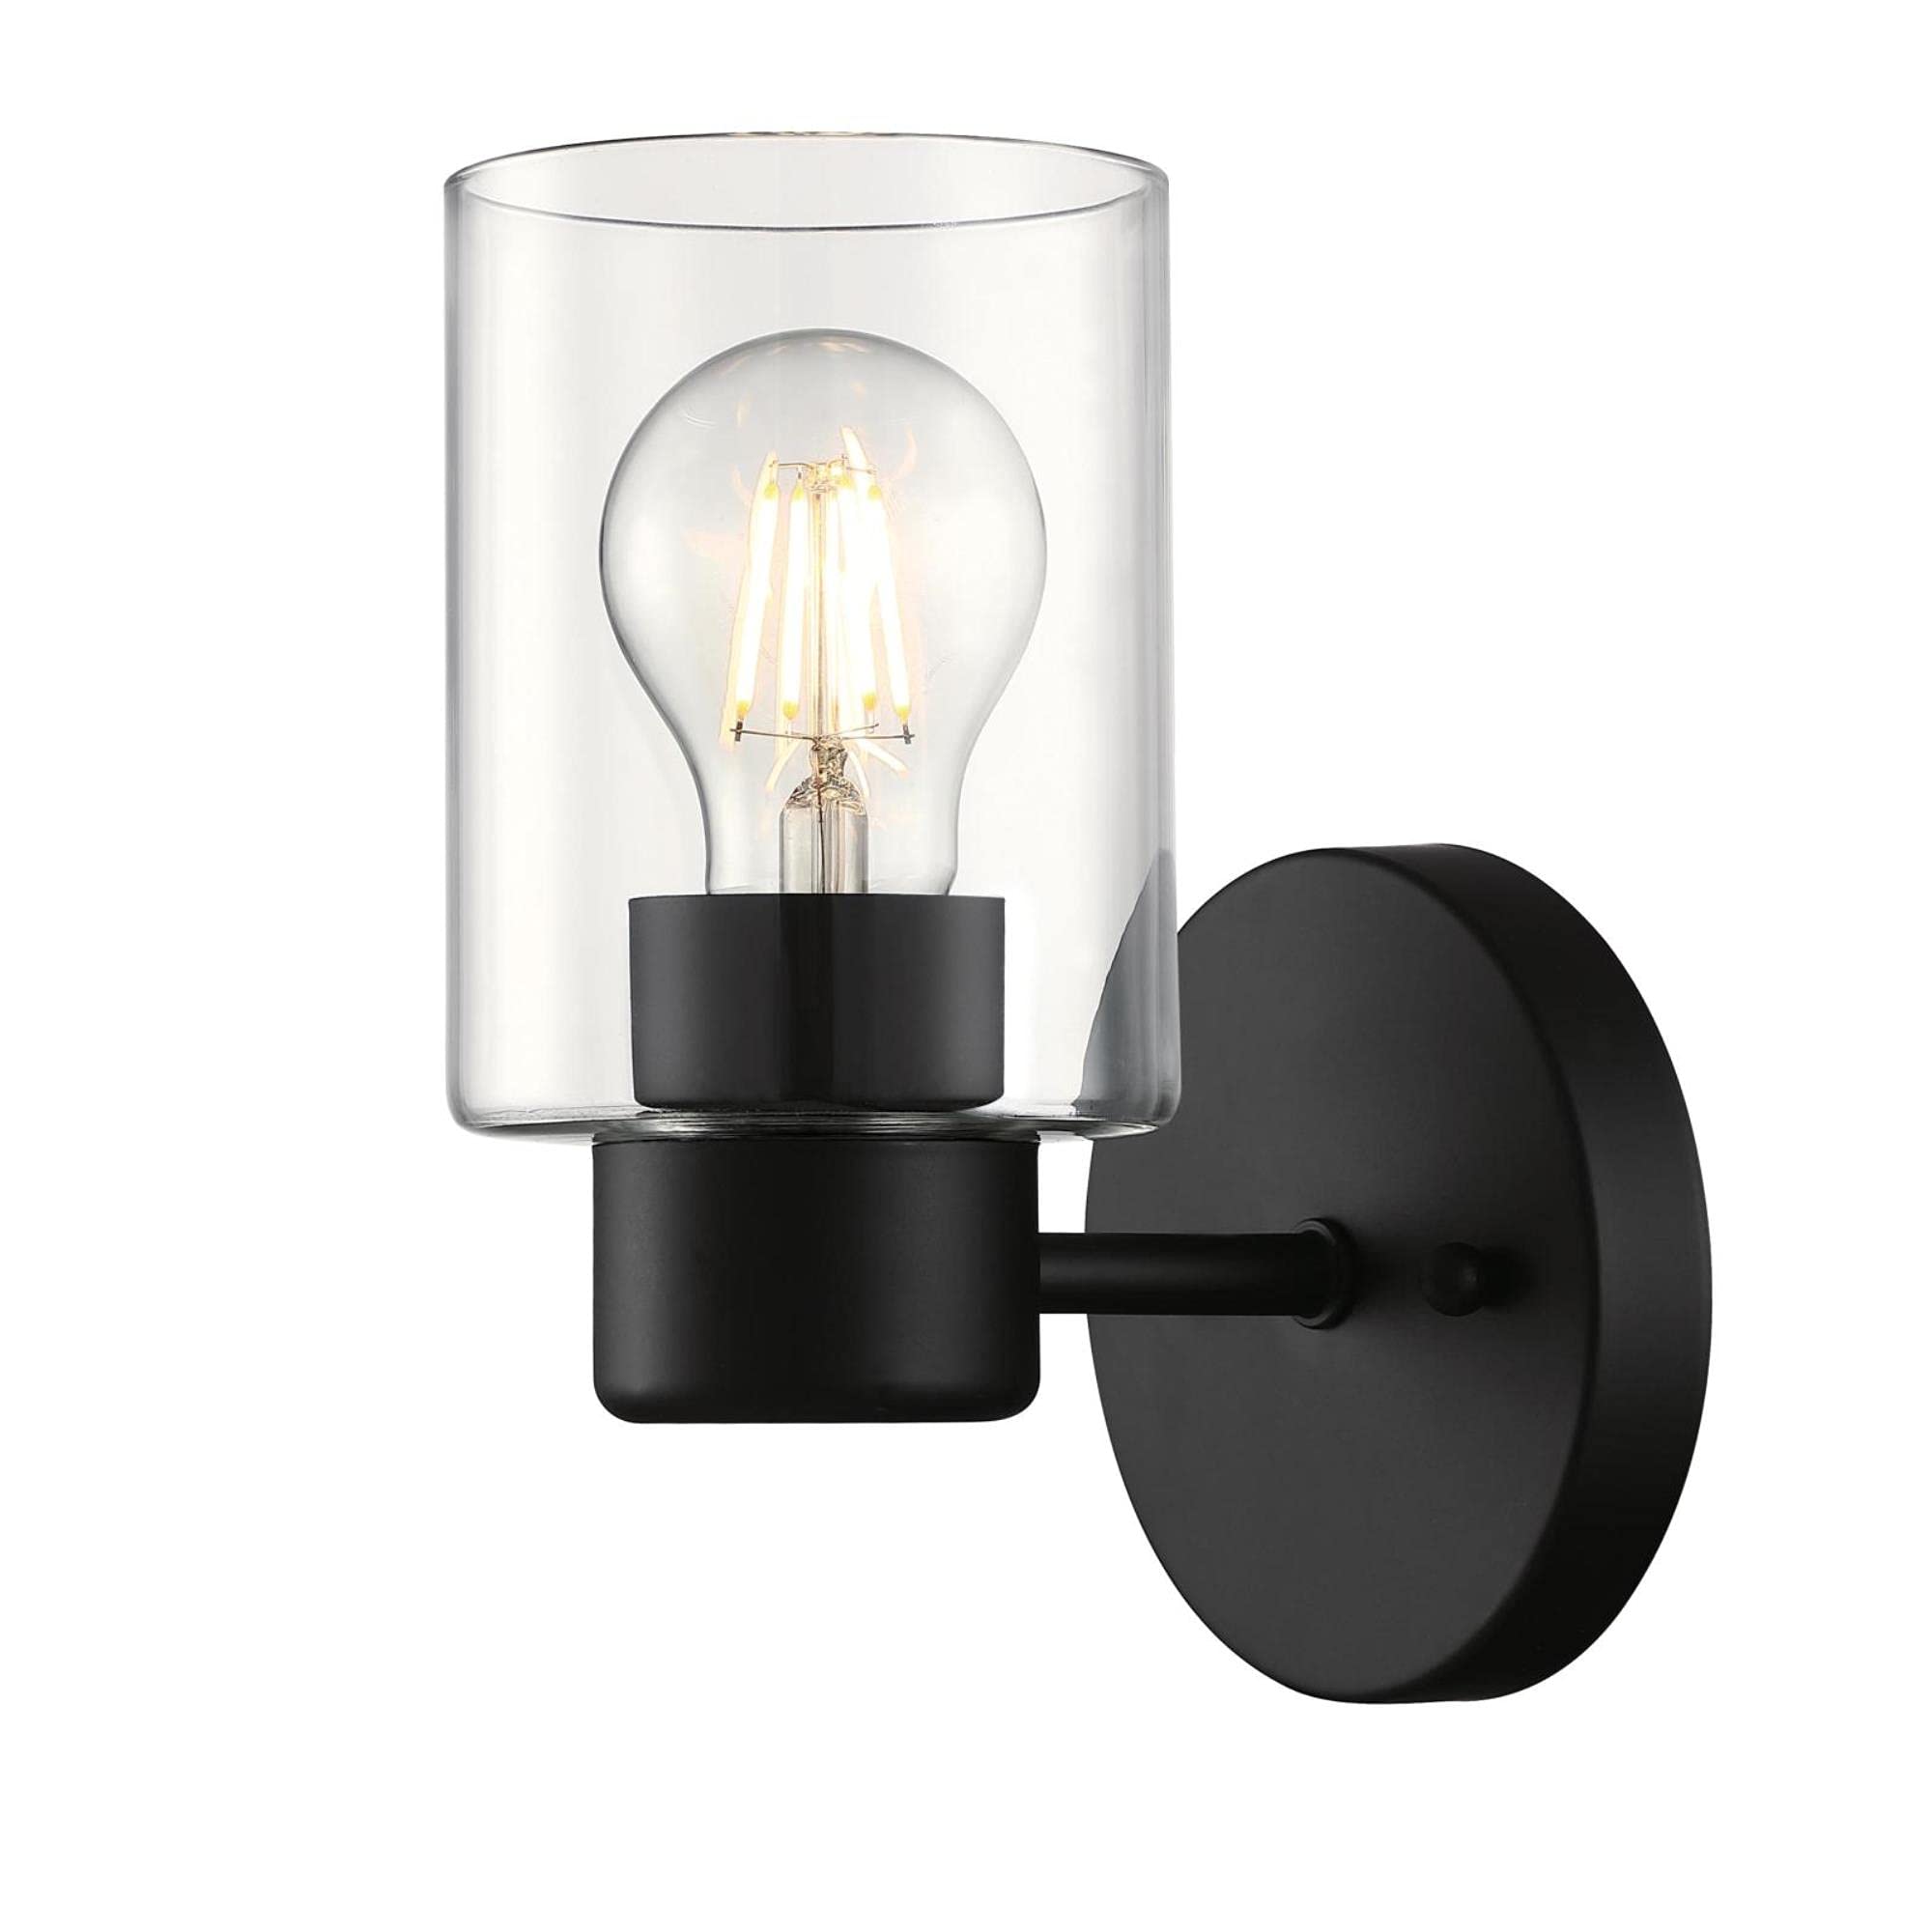 Westinghouse Lighting 6115500 Sylvestre Transitional One-Light Indoor Wall Light Fixture, Matte Black Finish, Clear Glass